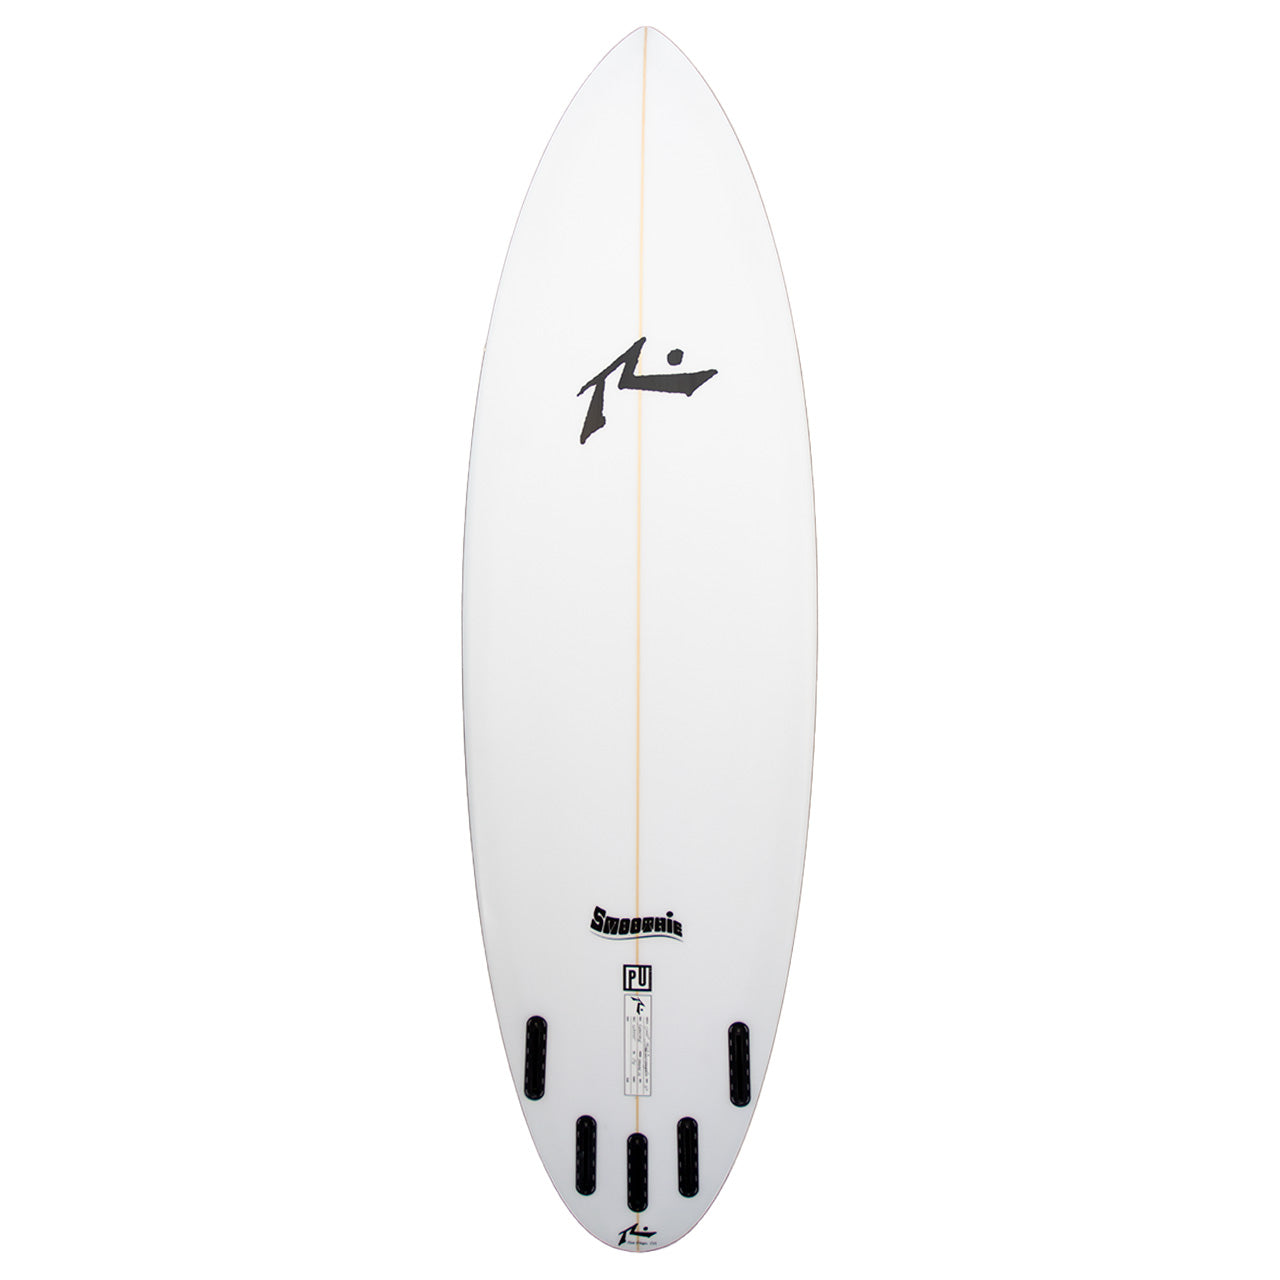 Smoothie Surfboard - Deck View - Rusty Surfboards